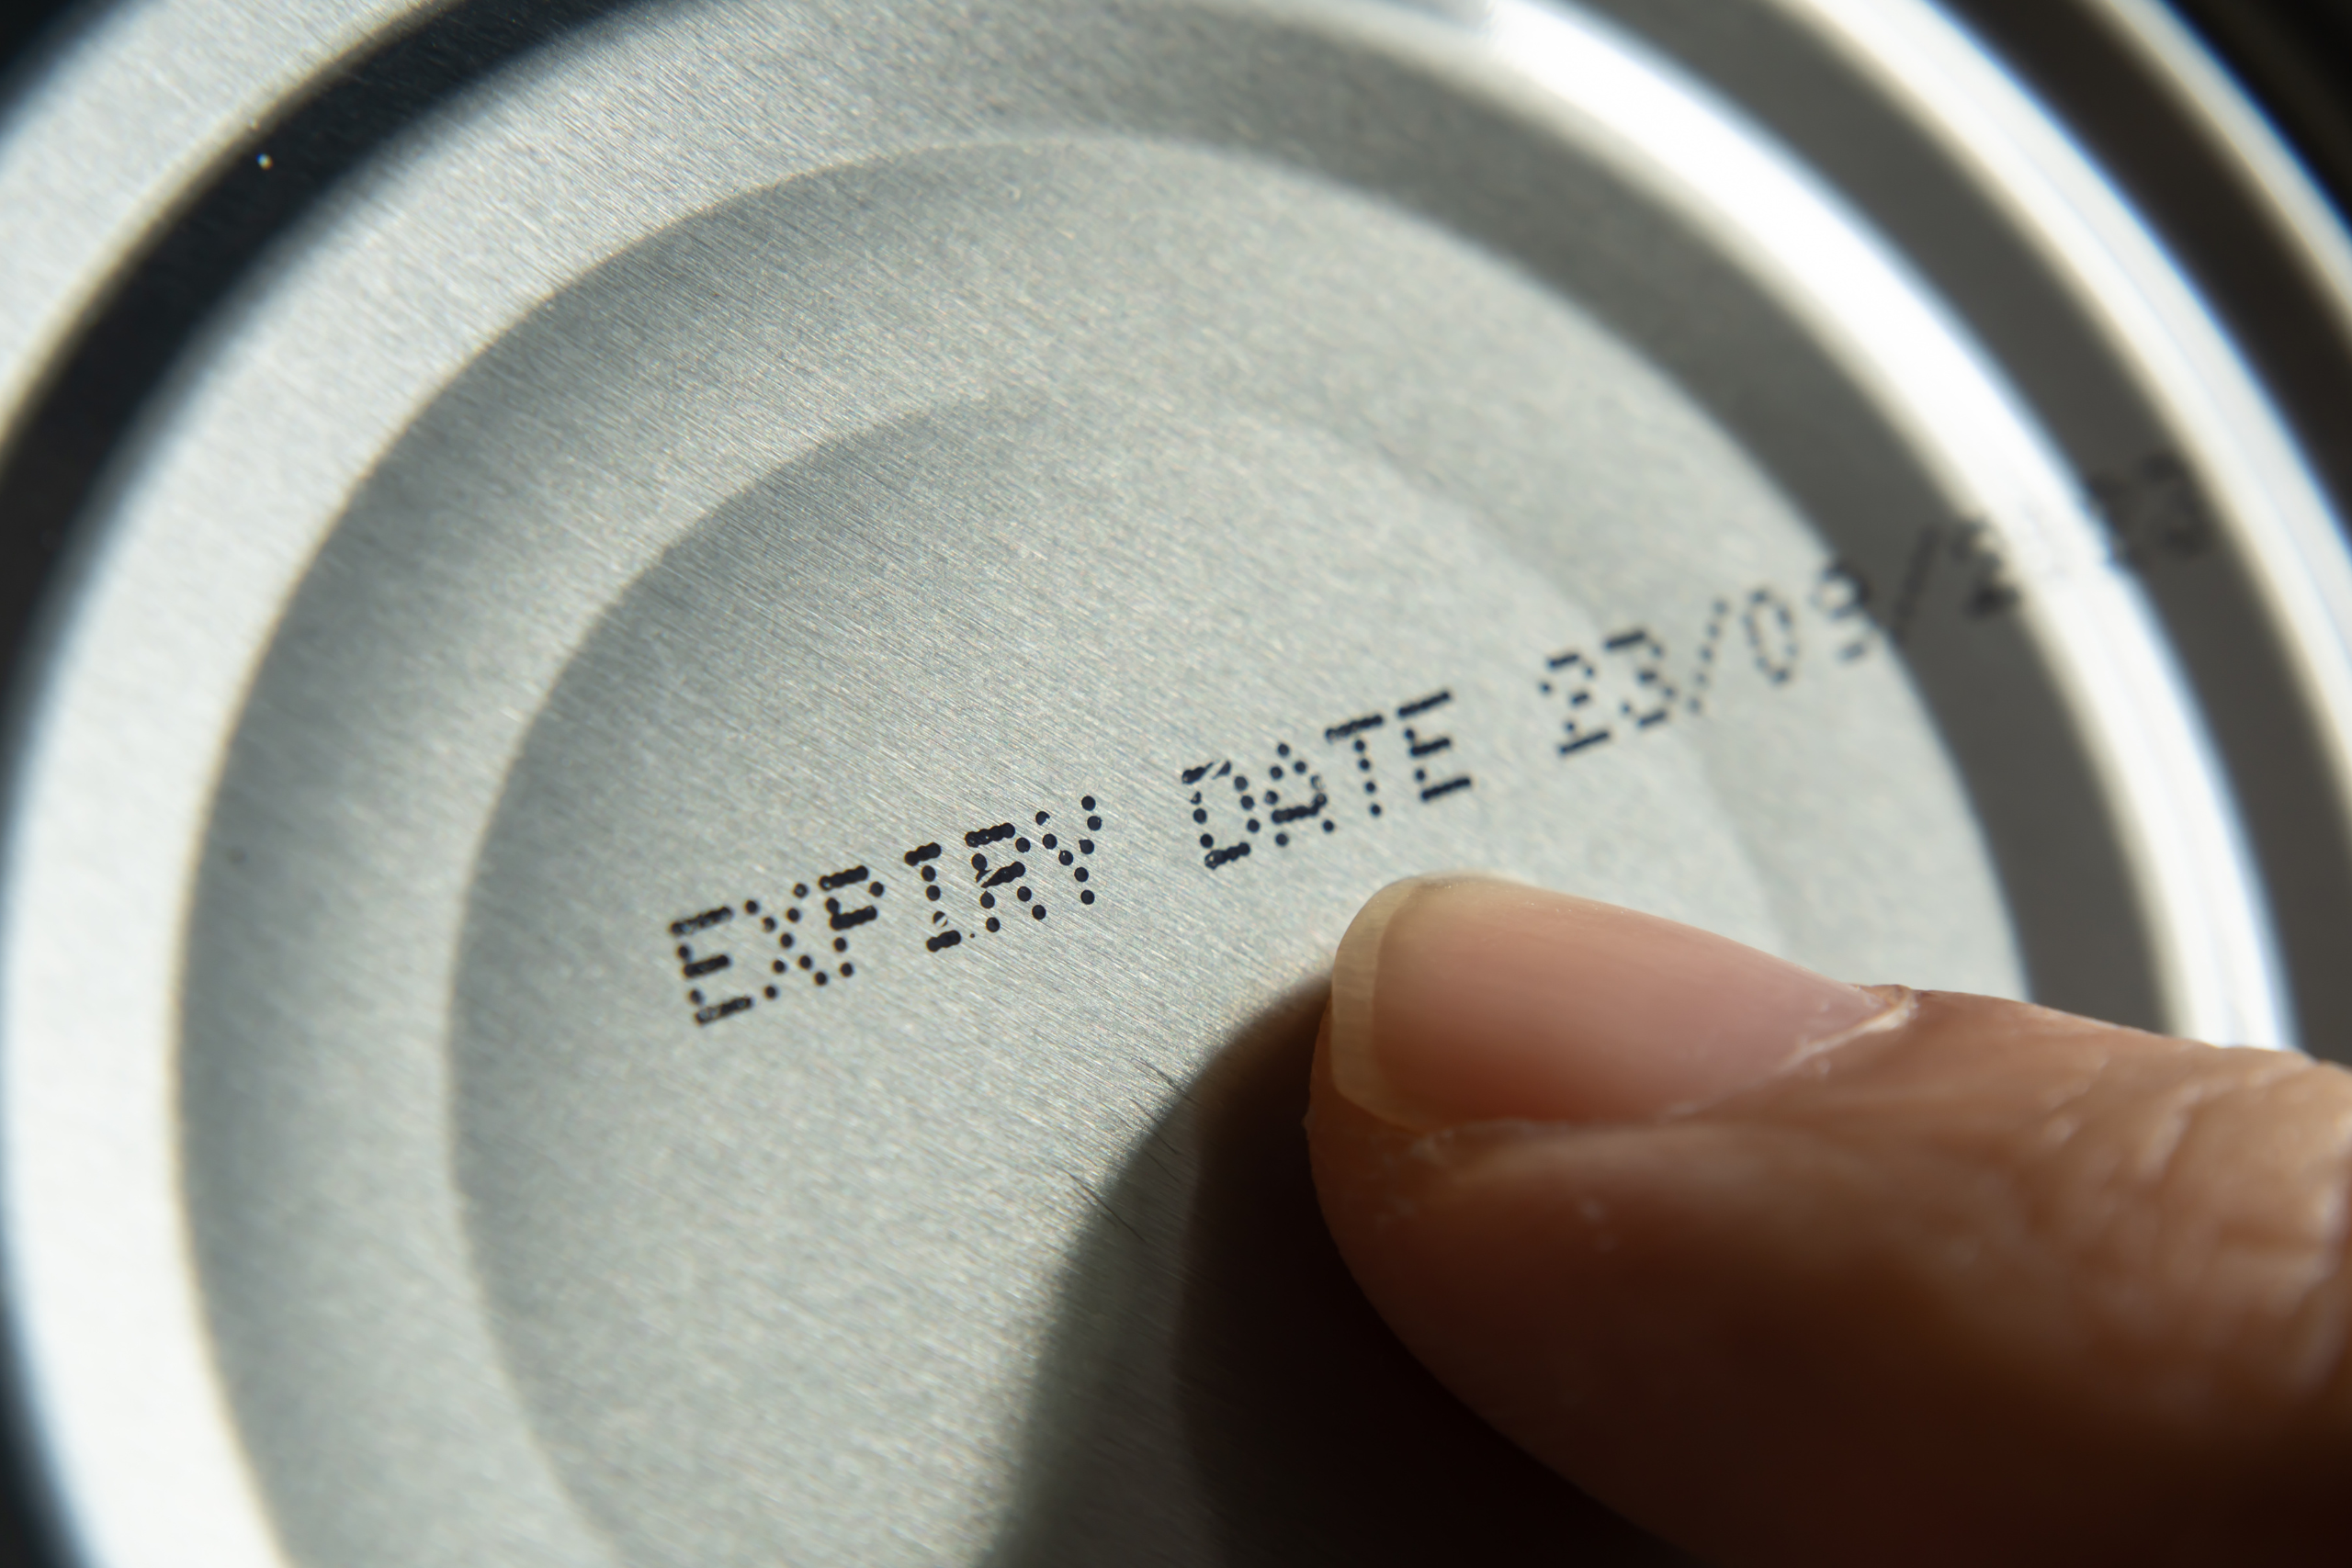 Do food expiration dates really matter?